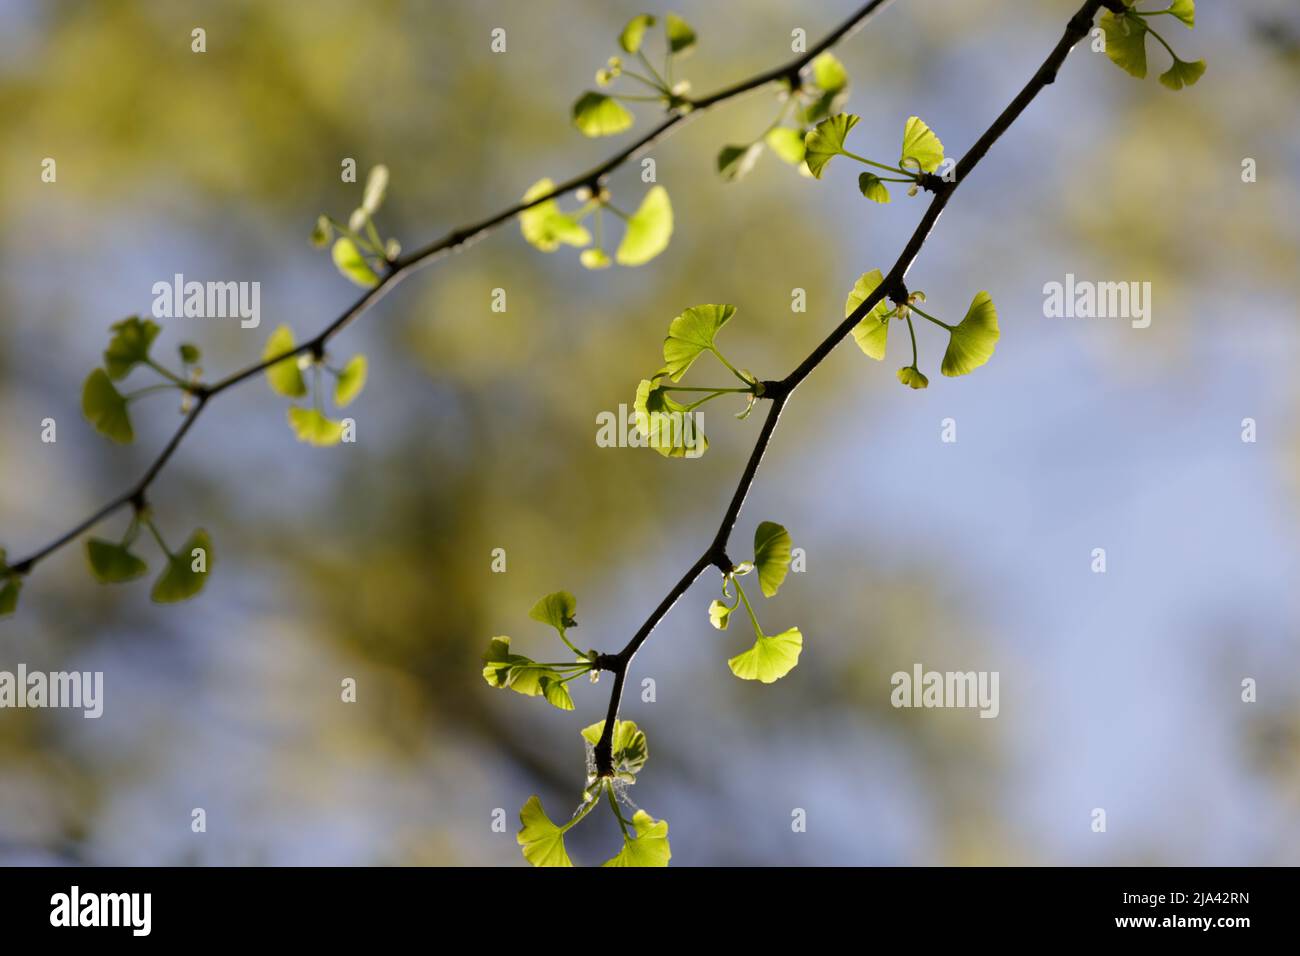 Ginkgo biloba. First spring foliage. Young small green leaves in bright contrasting light with a blurry background Stock Photo